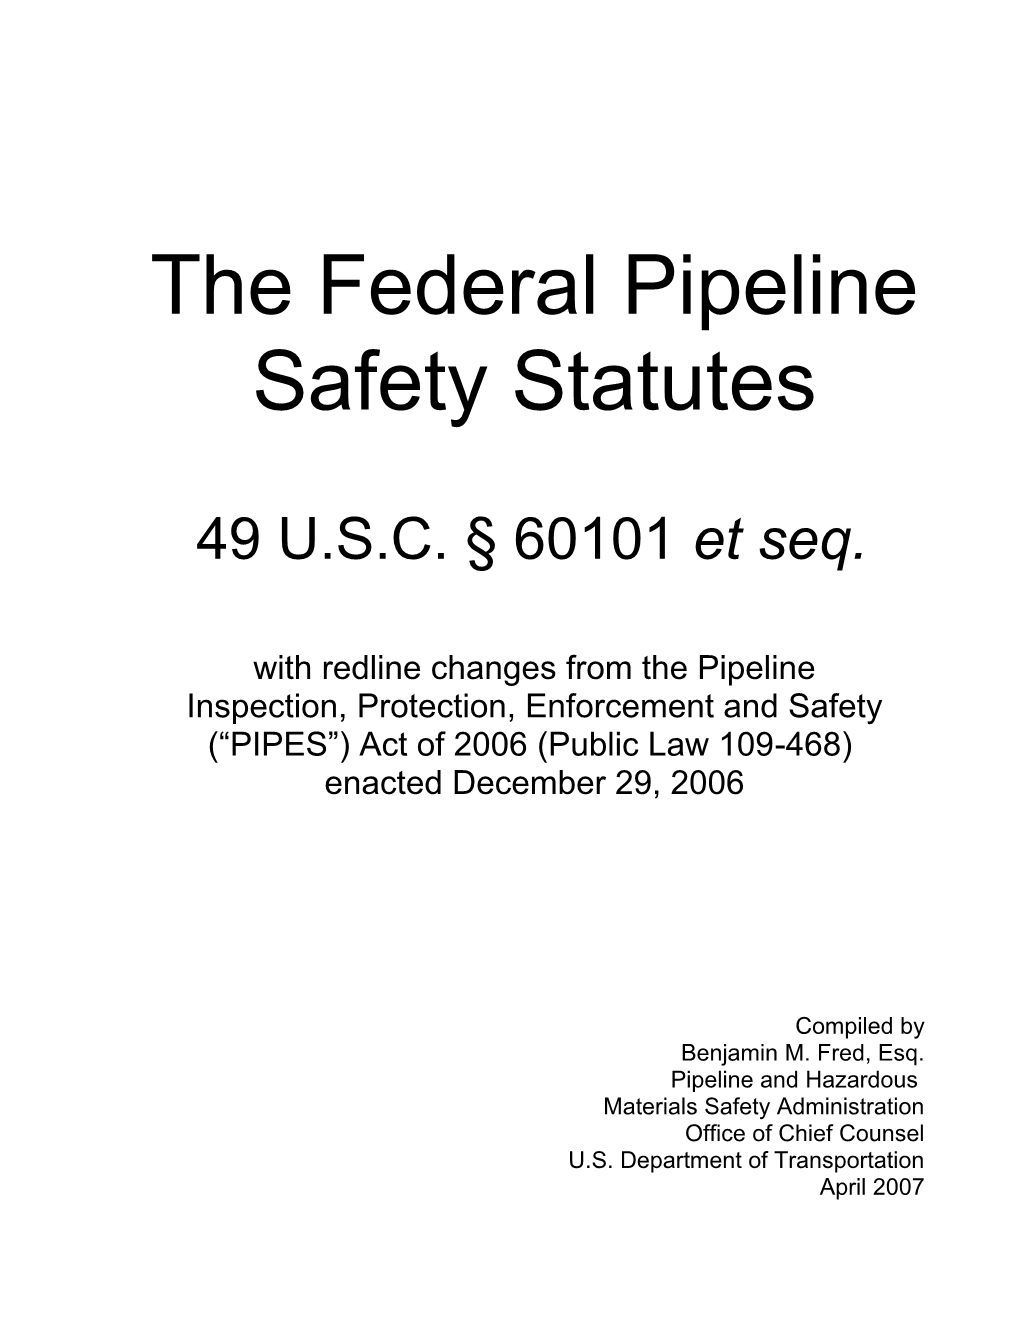 The Federal Pipeline Safety Statutes